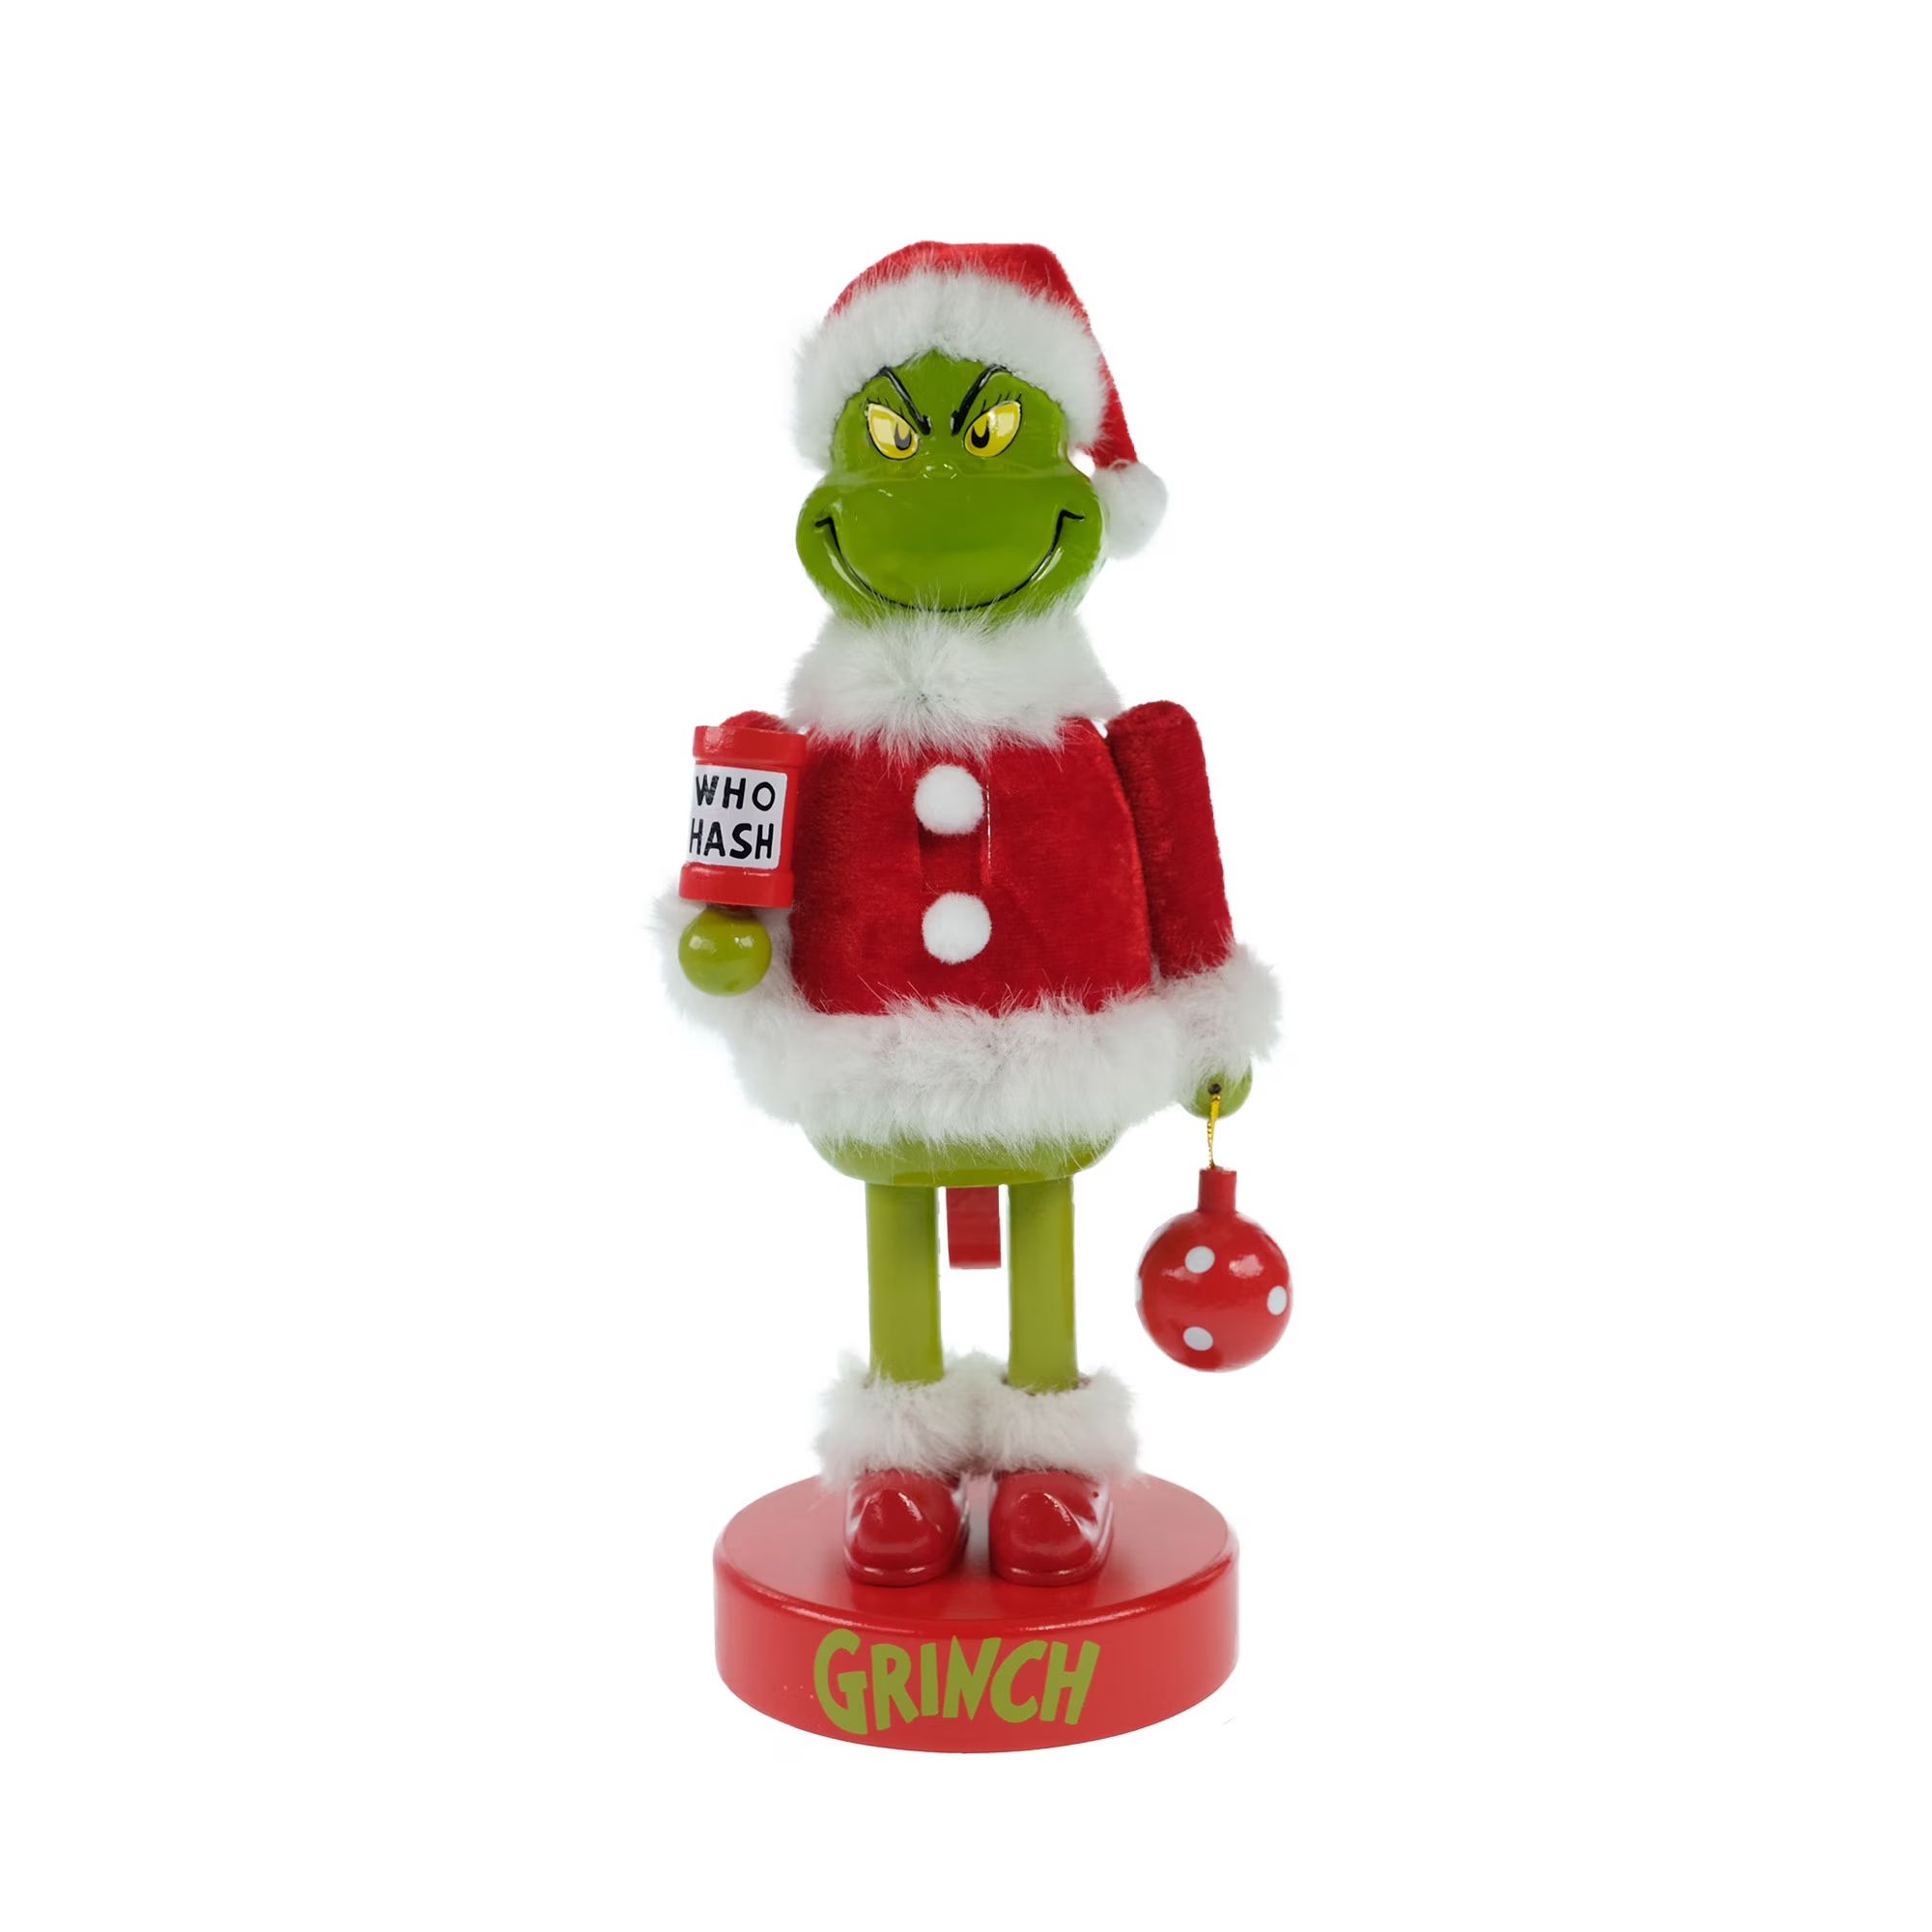 Dr Seuss' The Grinch Who Stole Christmas, Grinch Nutcracker, 11" Tall, Green, Red, Multi-color | Walmart (US)